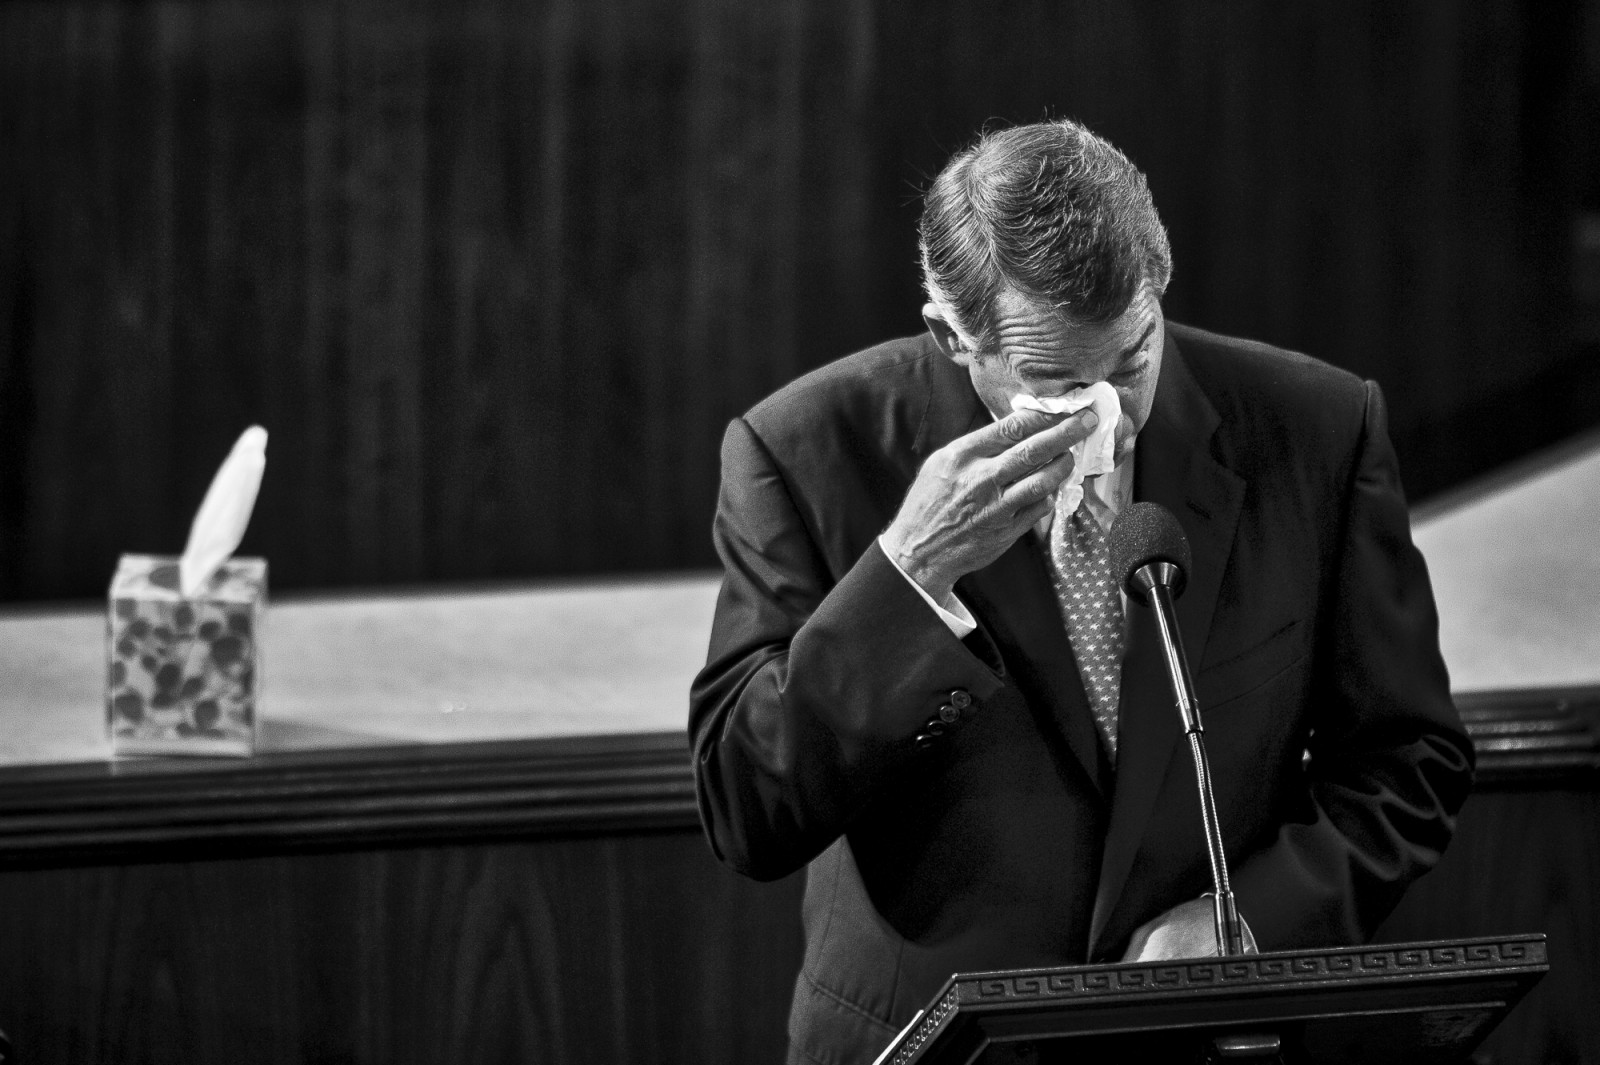 The day before he is to retire from Congress, Speaker of the House John Boehner (R-OH) becomes emotional as he delivers his farewell address to the House of Representatives on October 29, 2015 in Washington, D.C. Following his address, the House of Representatives will vote on Boehner’s replacement for Speaker. Photo by Pete Marovich/UPI